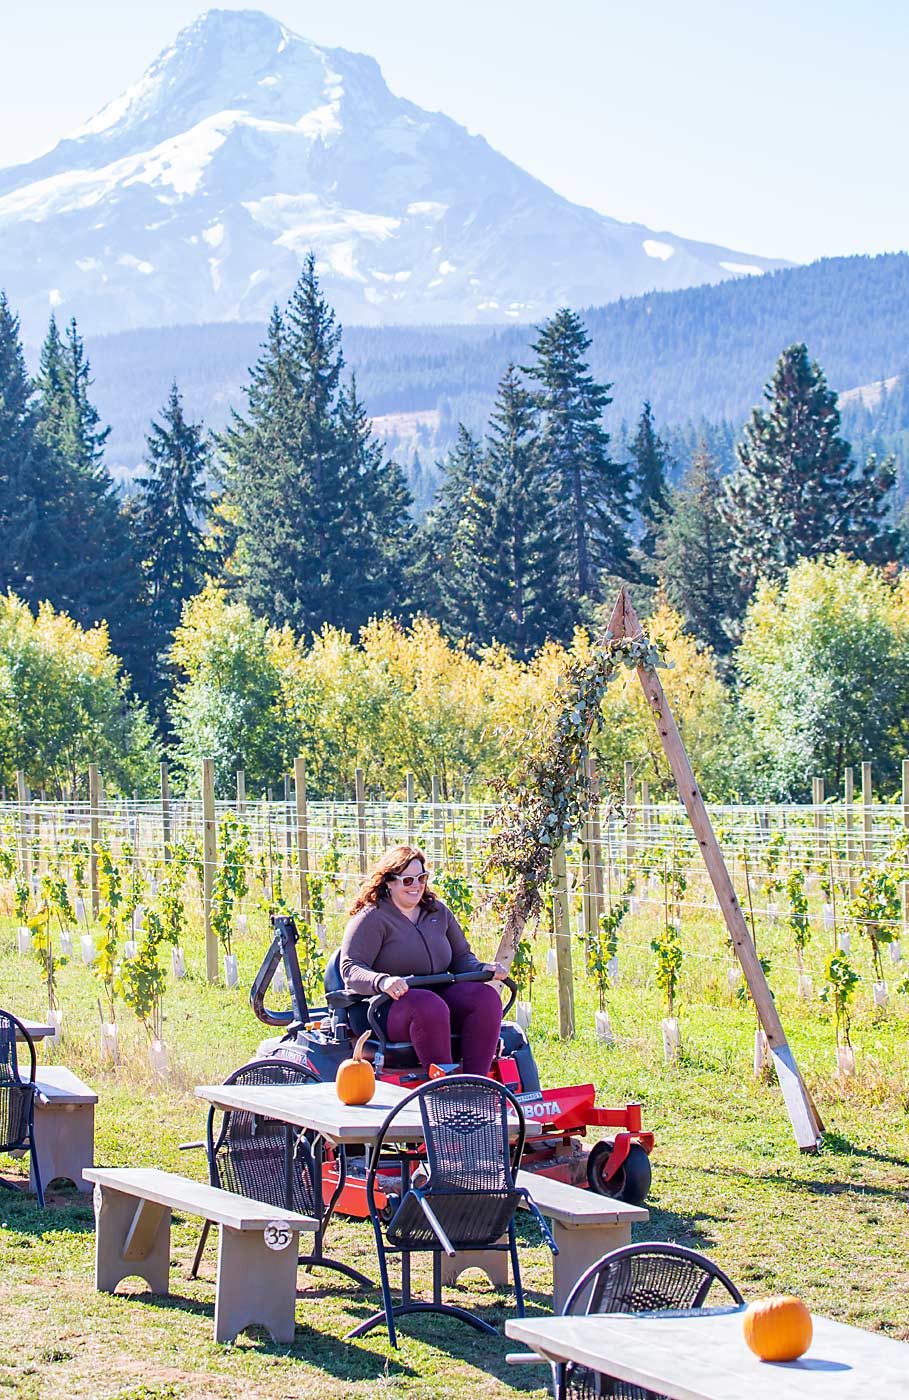 Trina McAlexander bought her parents’ 50-acre orchard in Parkdale, Oregon, in 2015, taking on loans that she said she could not have afforded without her job as a nurse practitioner. (TJ Mullinax/Good Fruit Grower)